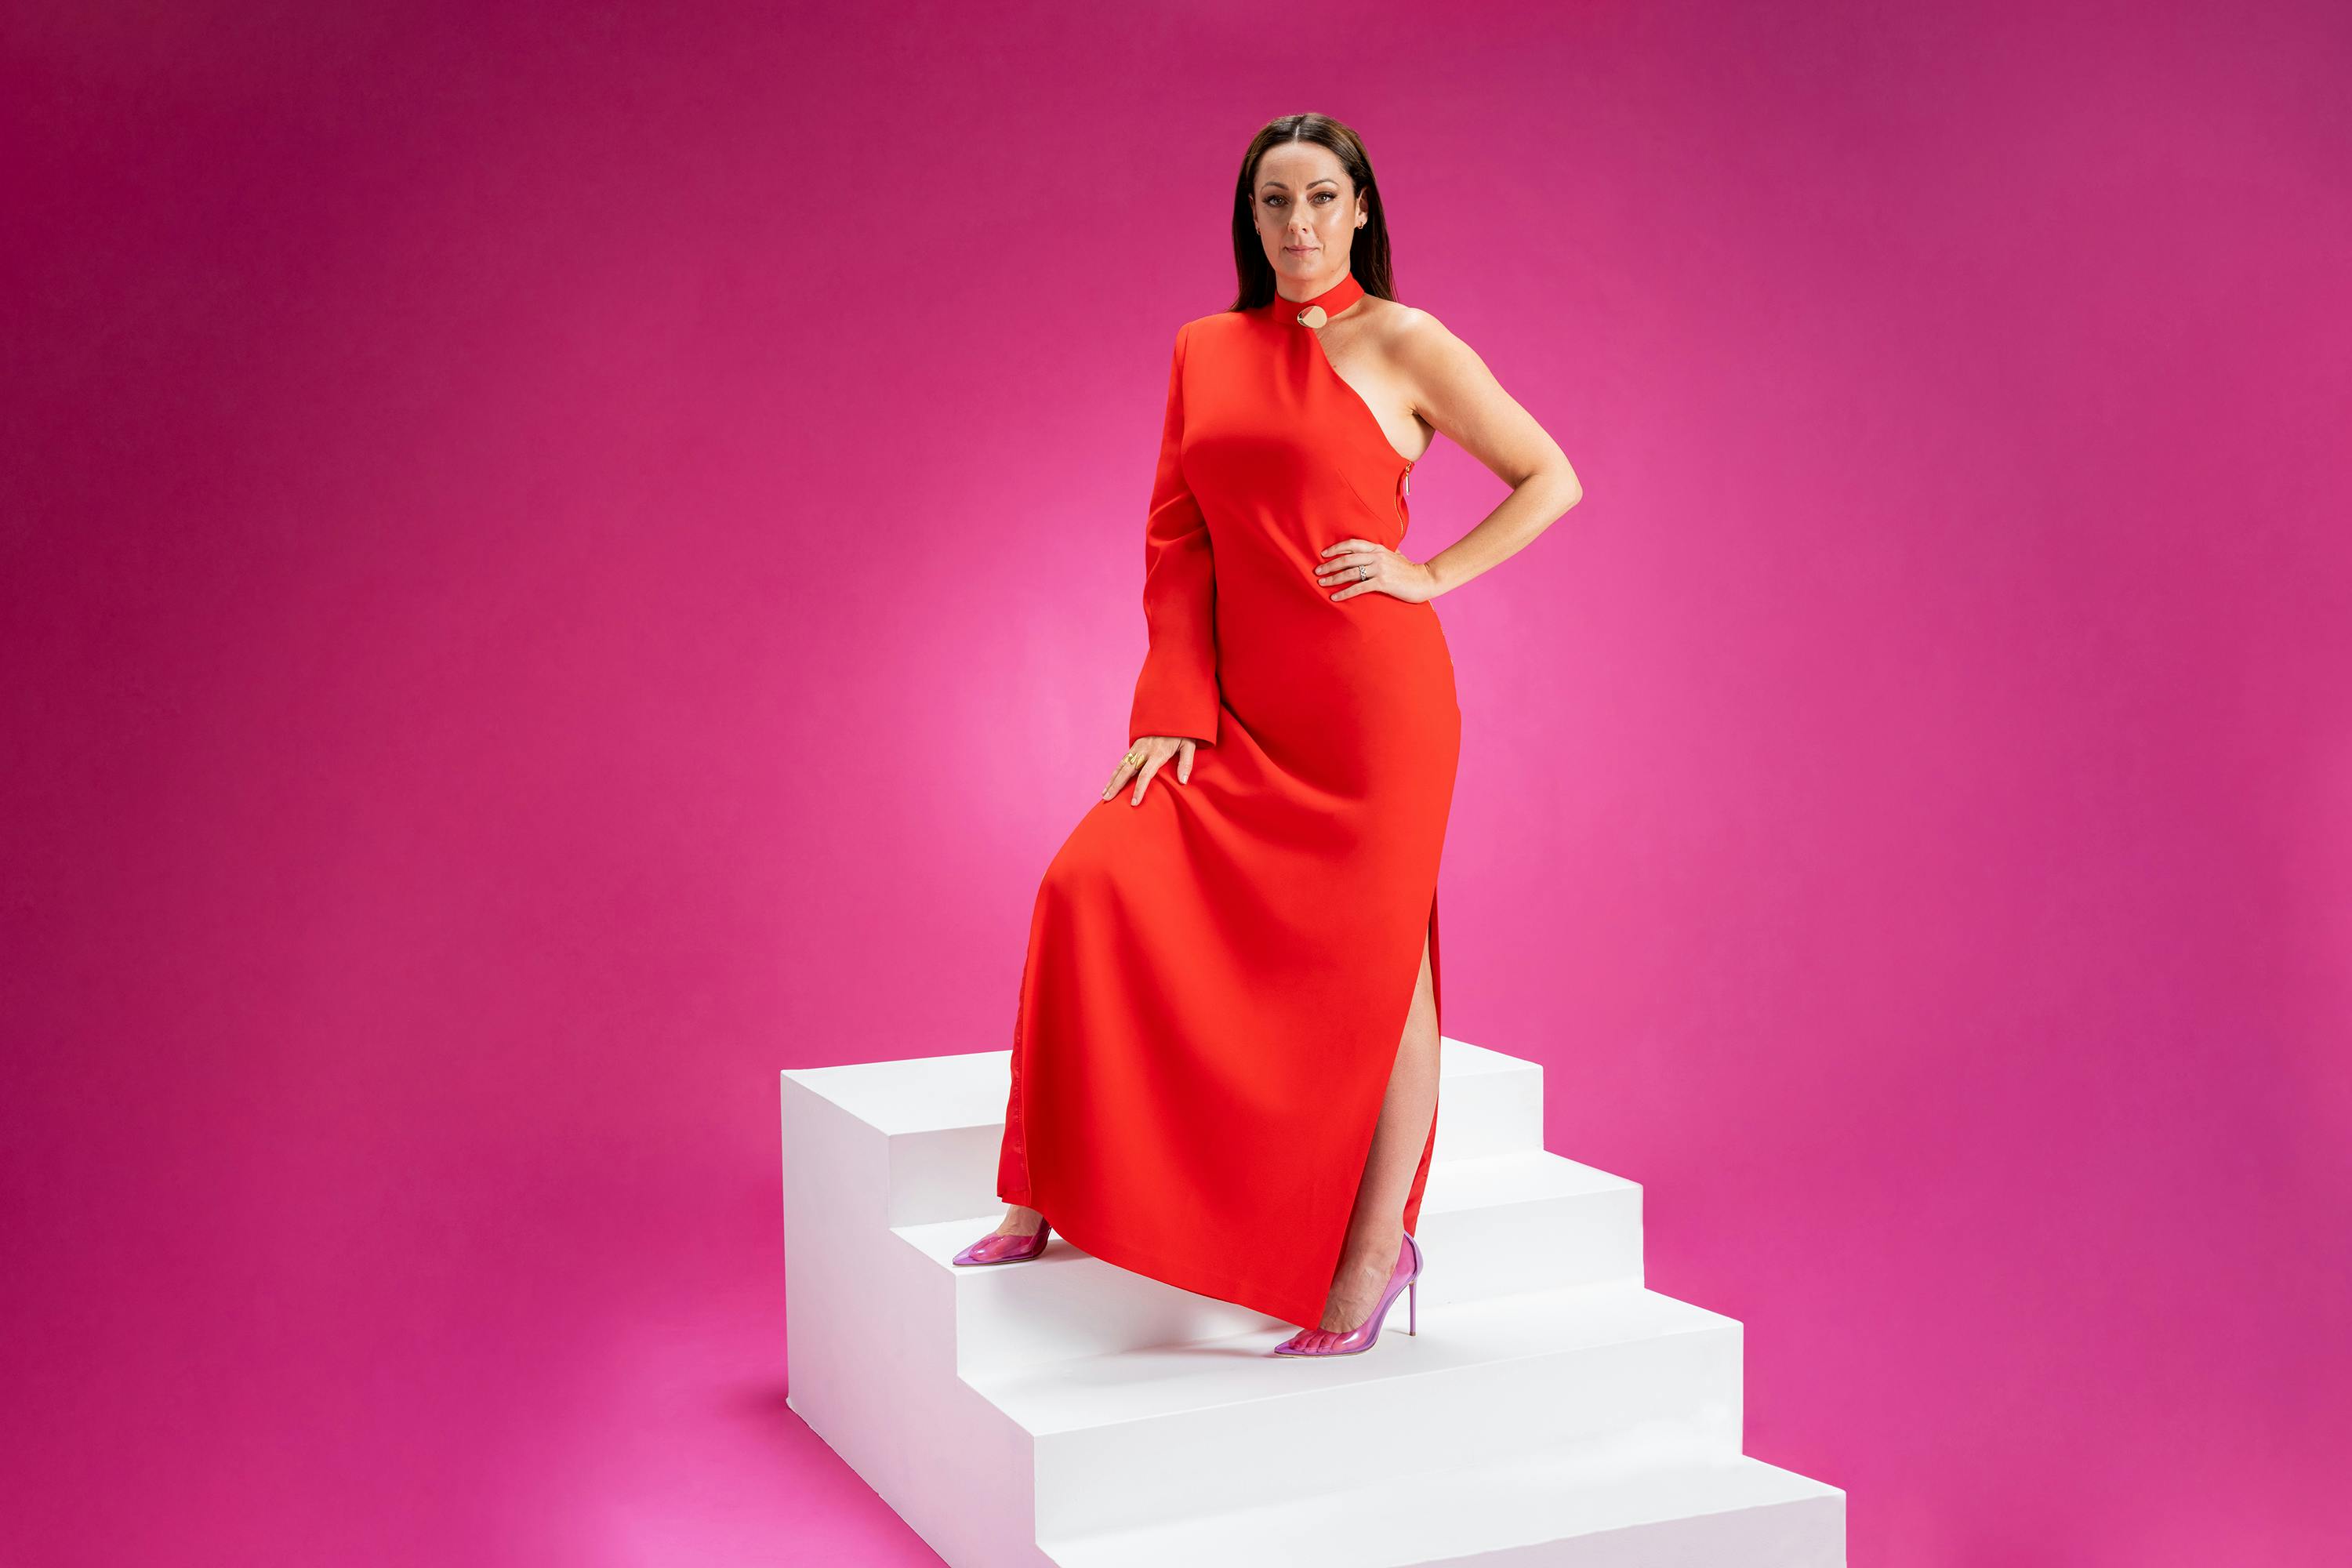 Celeste Barber wears a long red dress and poses on a staircase against a pink background.